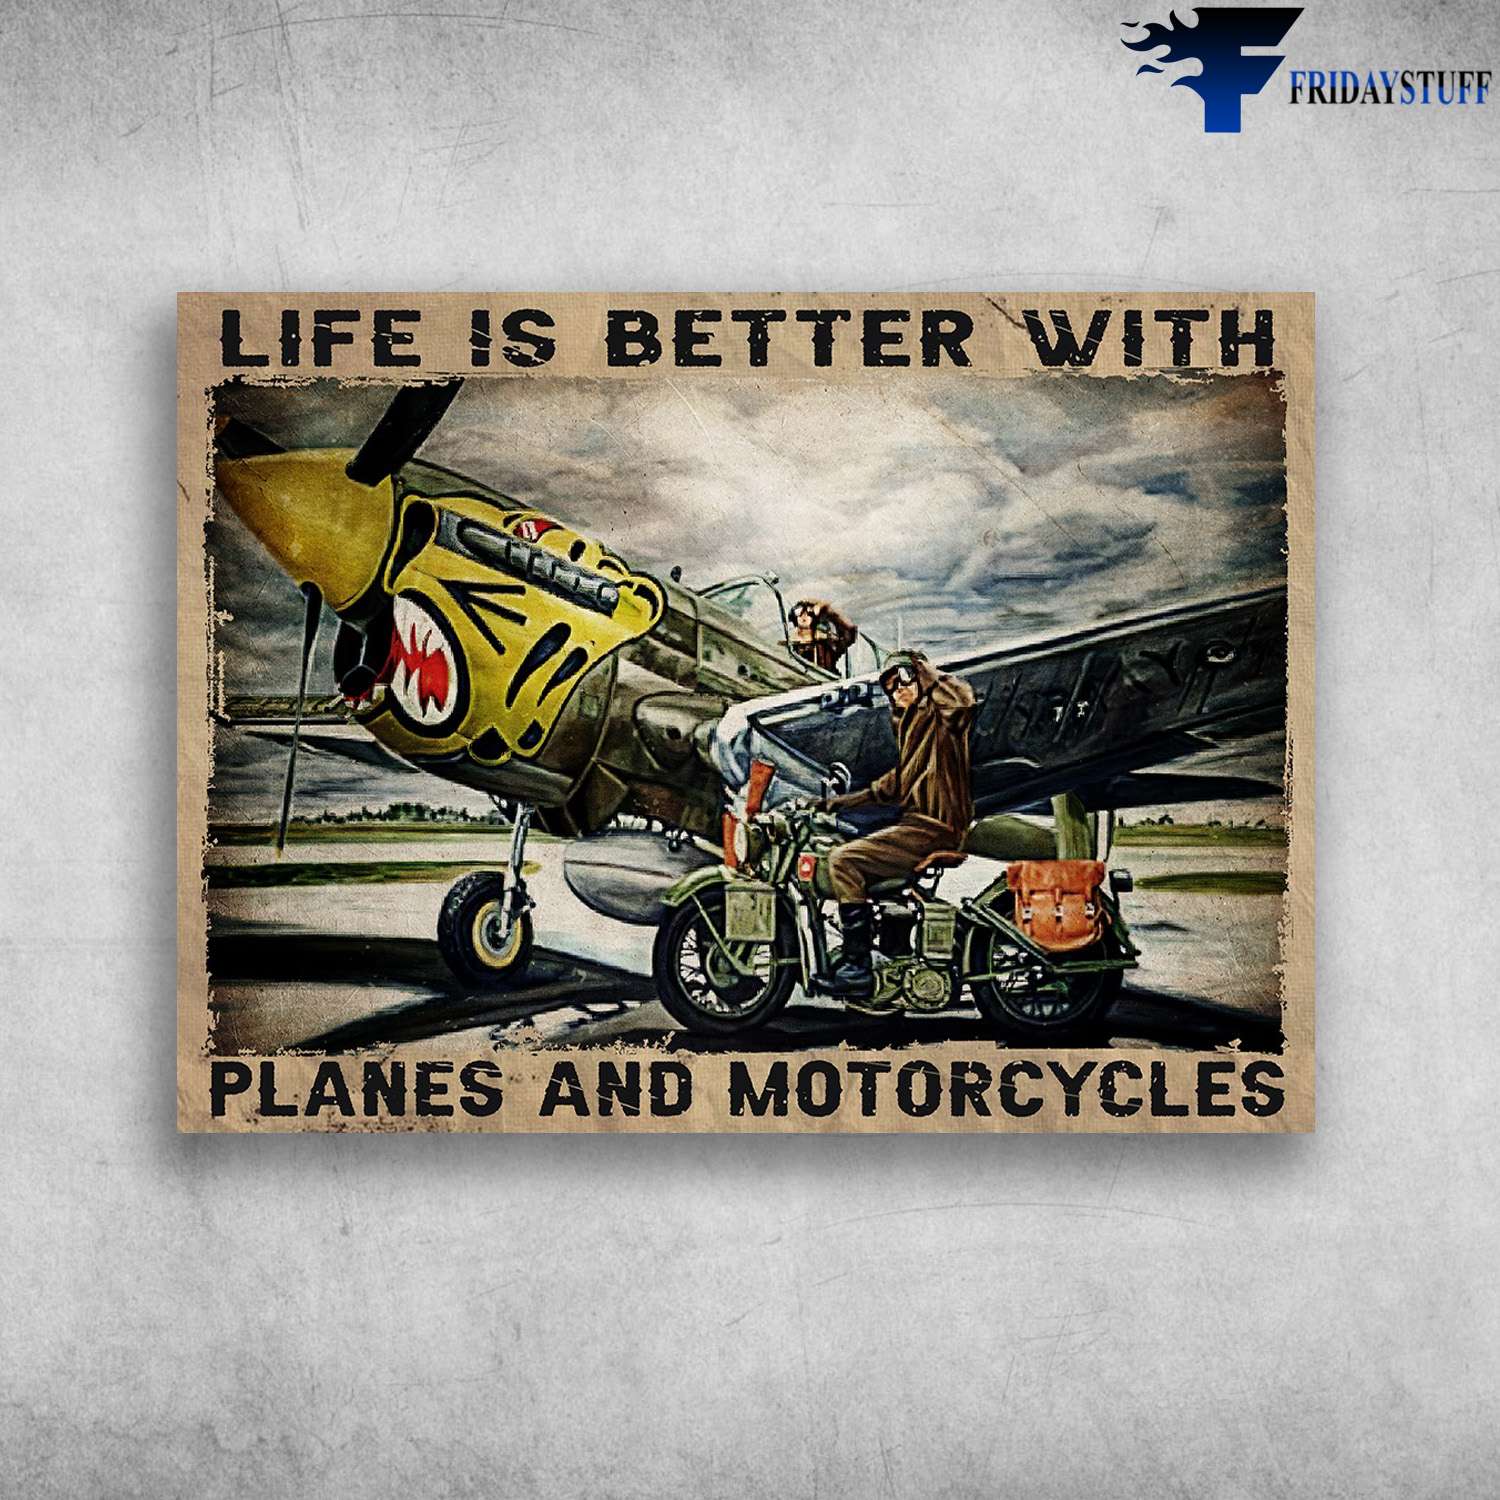 Biker Pilot - Life Is Better With, Planes And Motorcycles